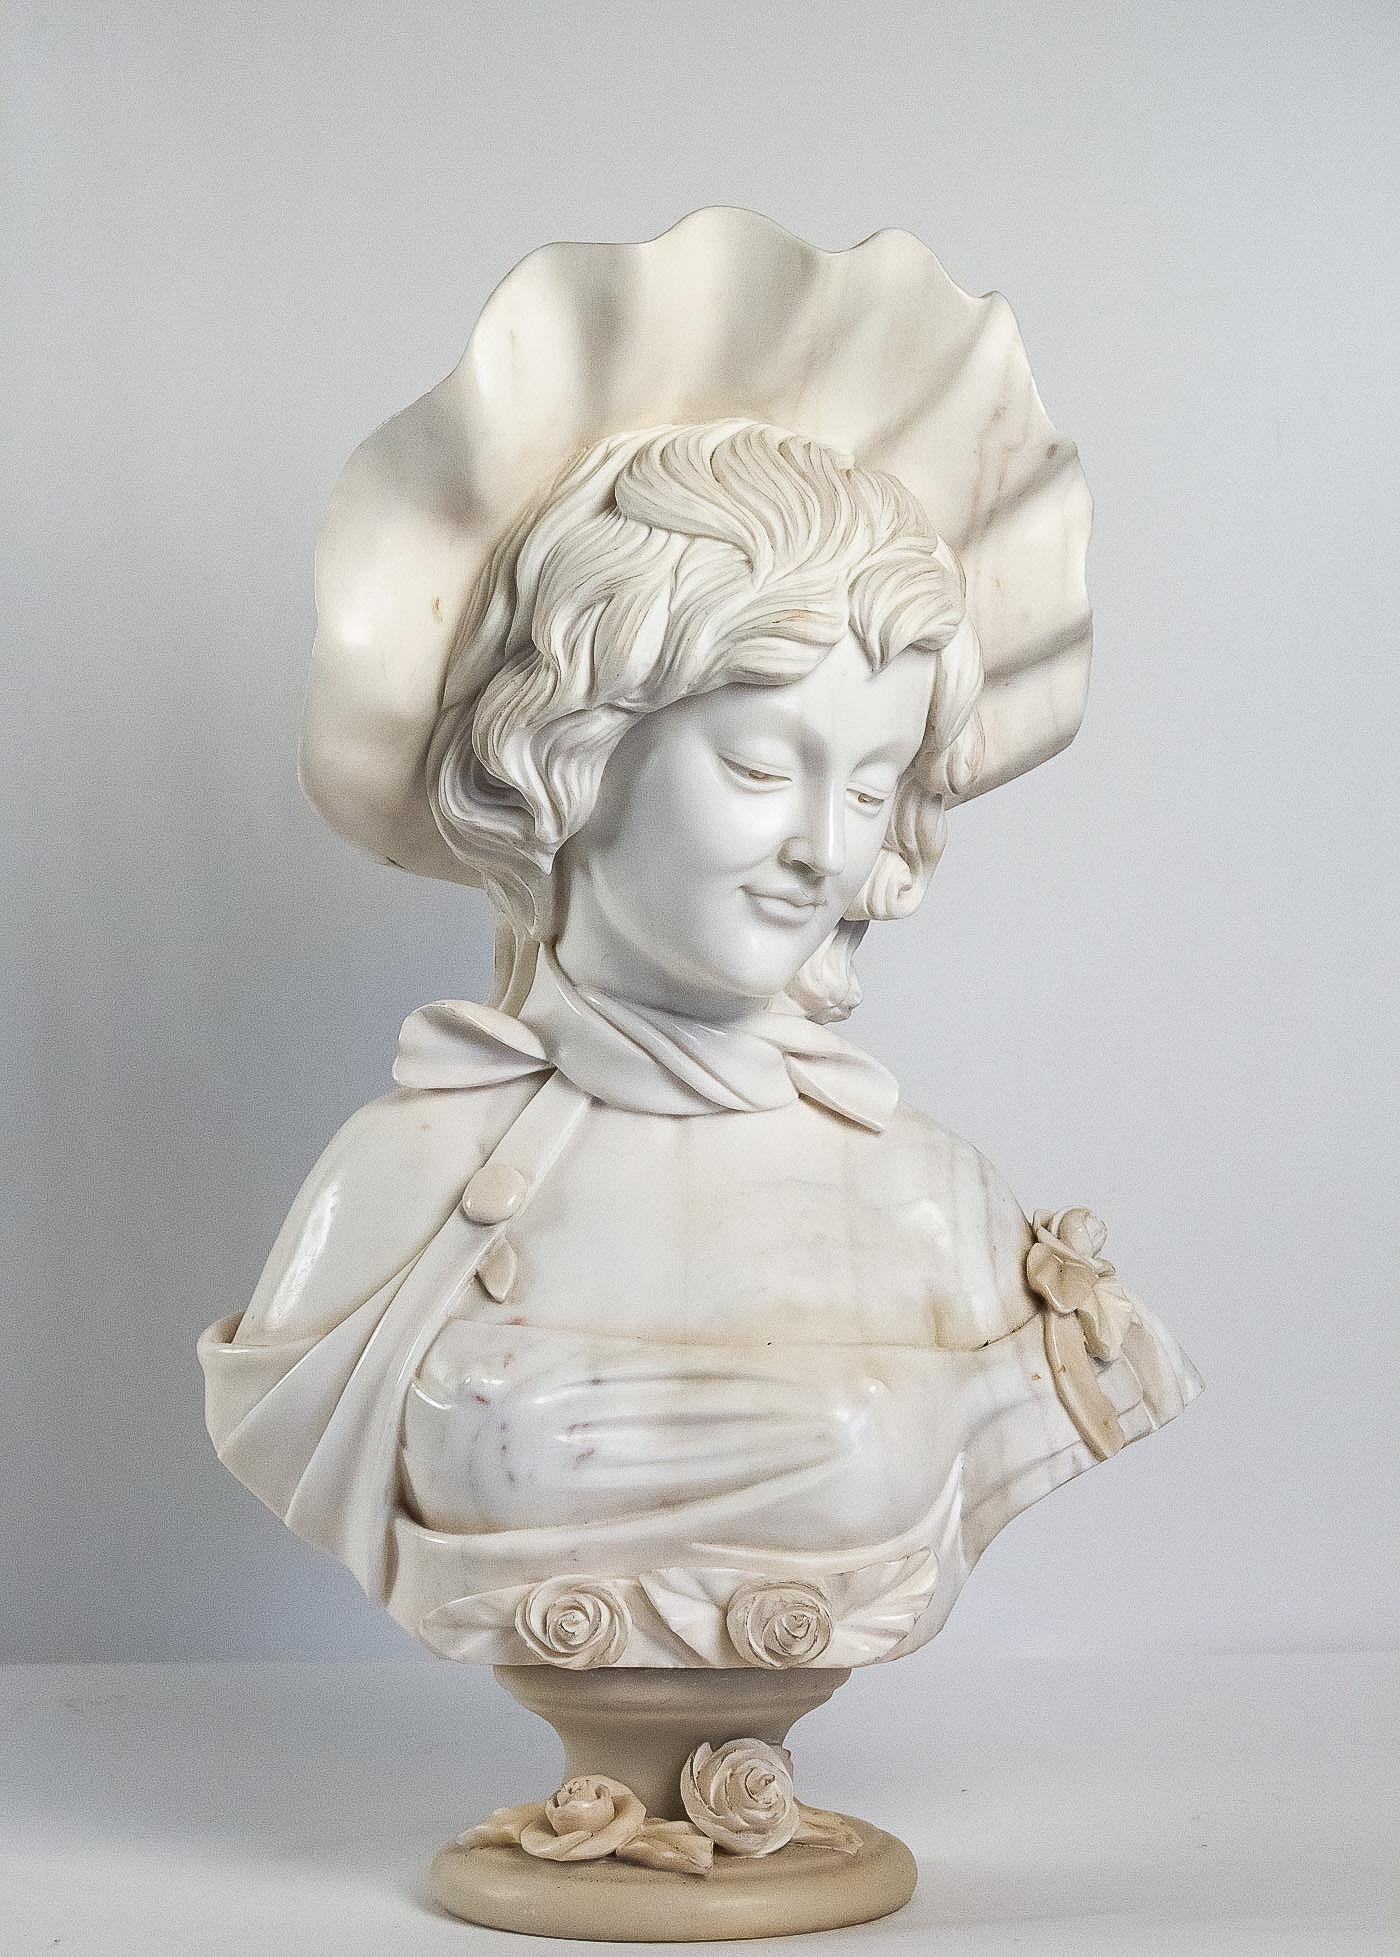 White Carrara marble bust, A French elegant, circa 1900

A beautiful and decorative carved White Carrara marble bust, depicting A French elegant. The sculpture rests on a lovely marble base decorated with cut marble flowers.

Beautiful French